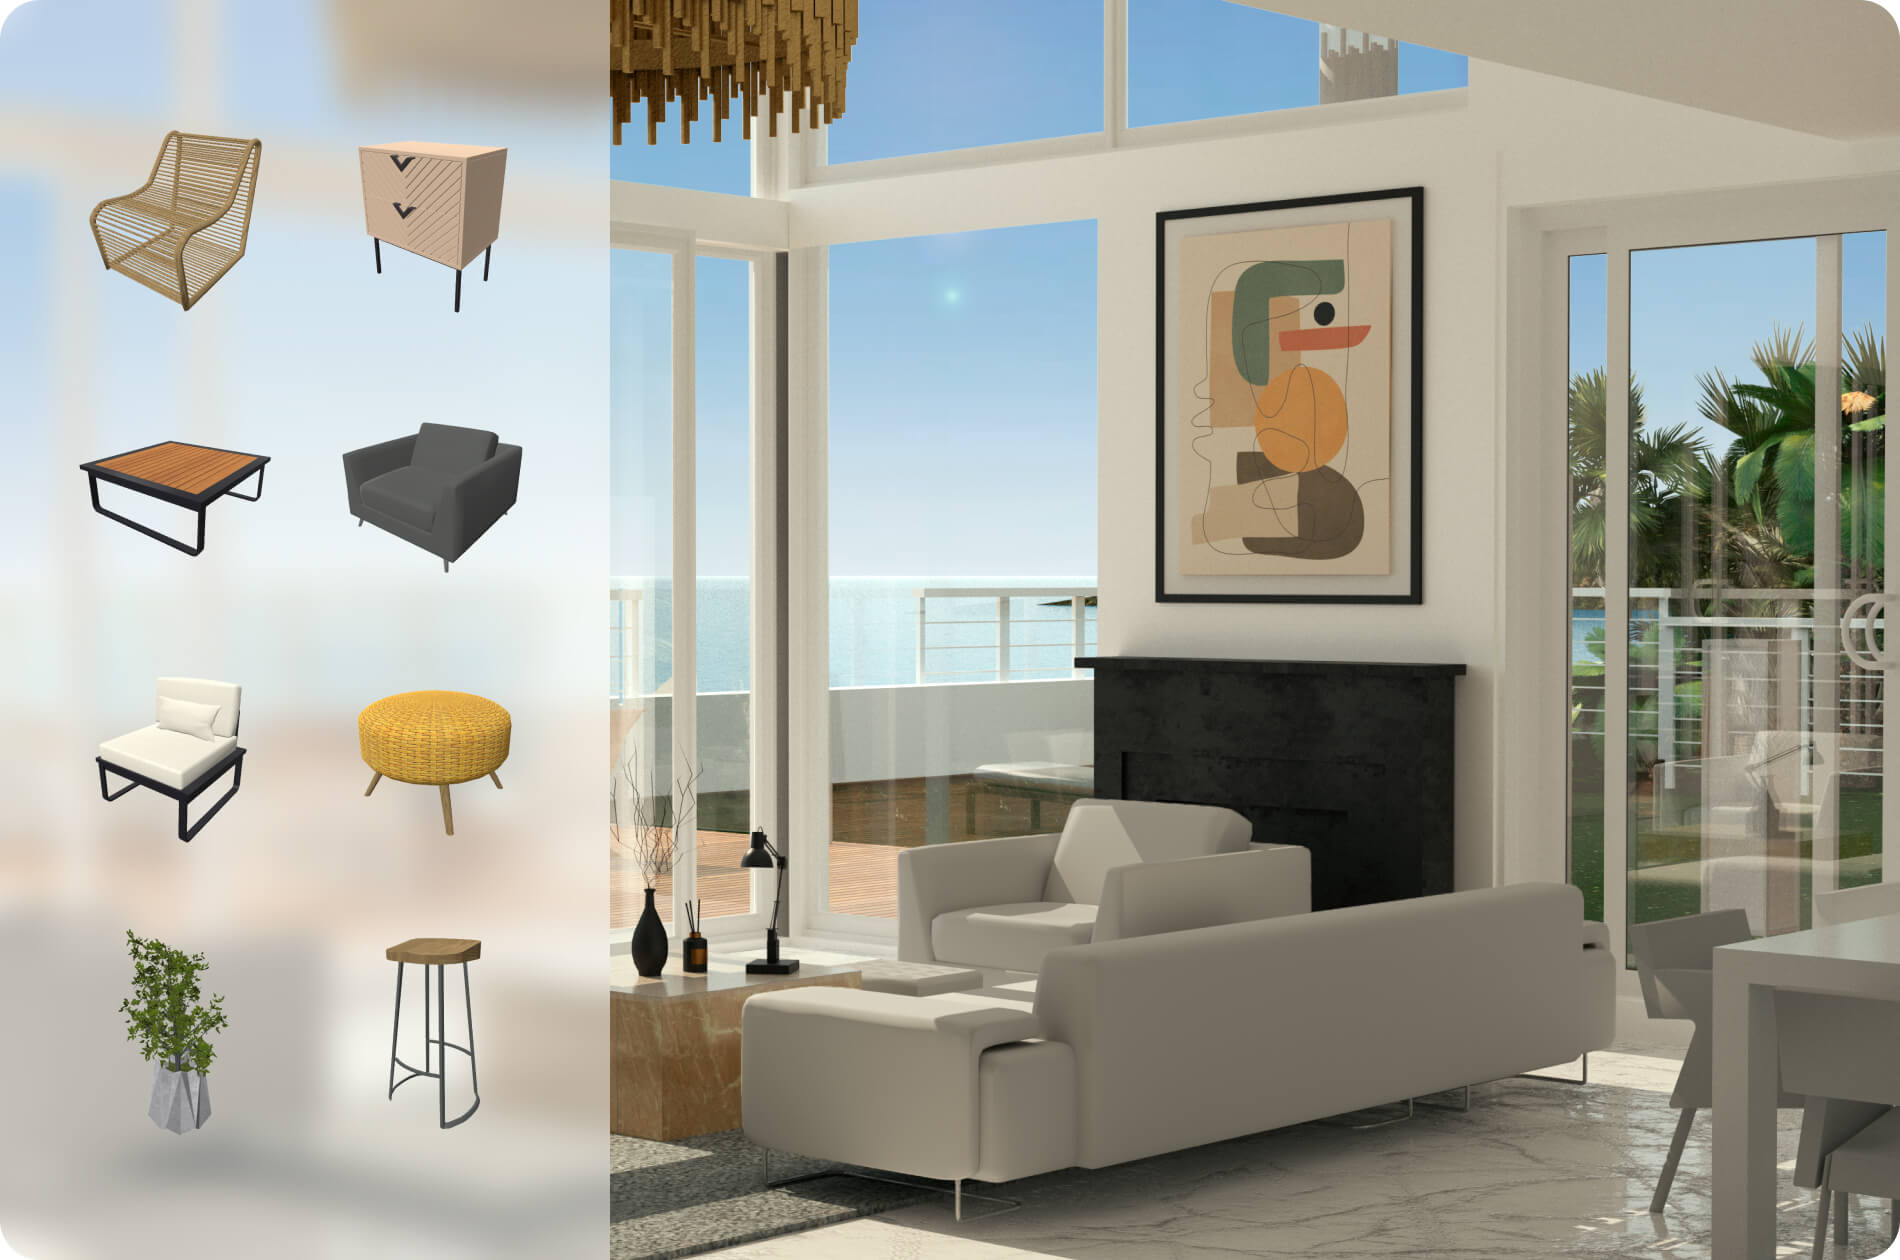 A living room interior design with a collection of 3D models available in the Live Home 3D object library.